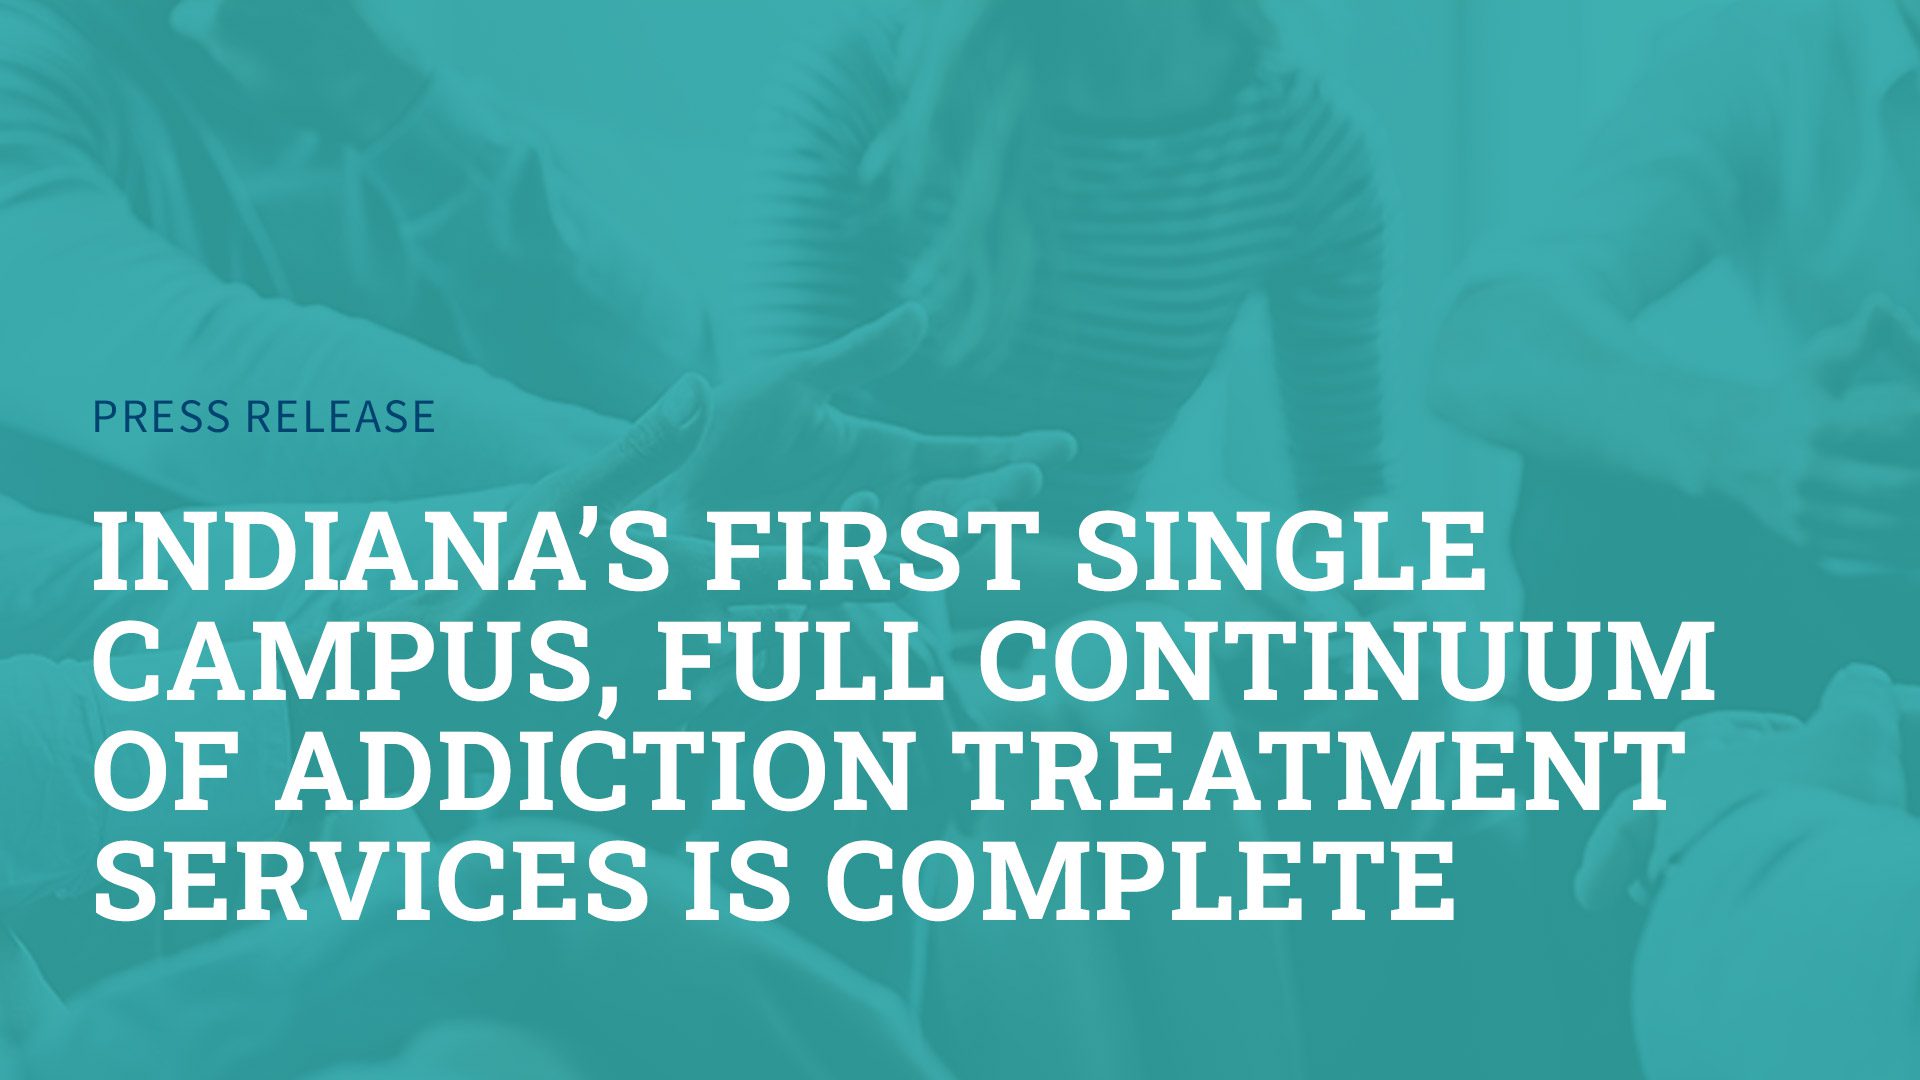 Indiana’s First Single Campus, Full Continuum of Addiction Treatment Services is Complete